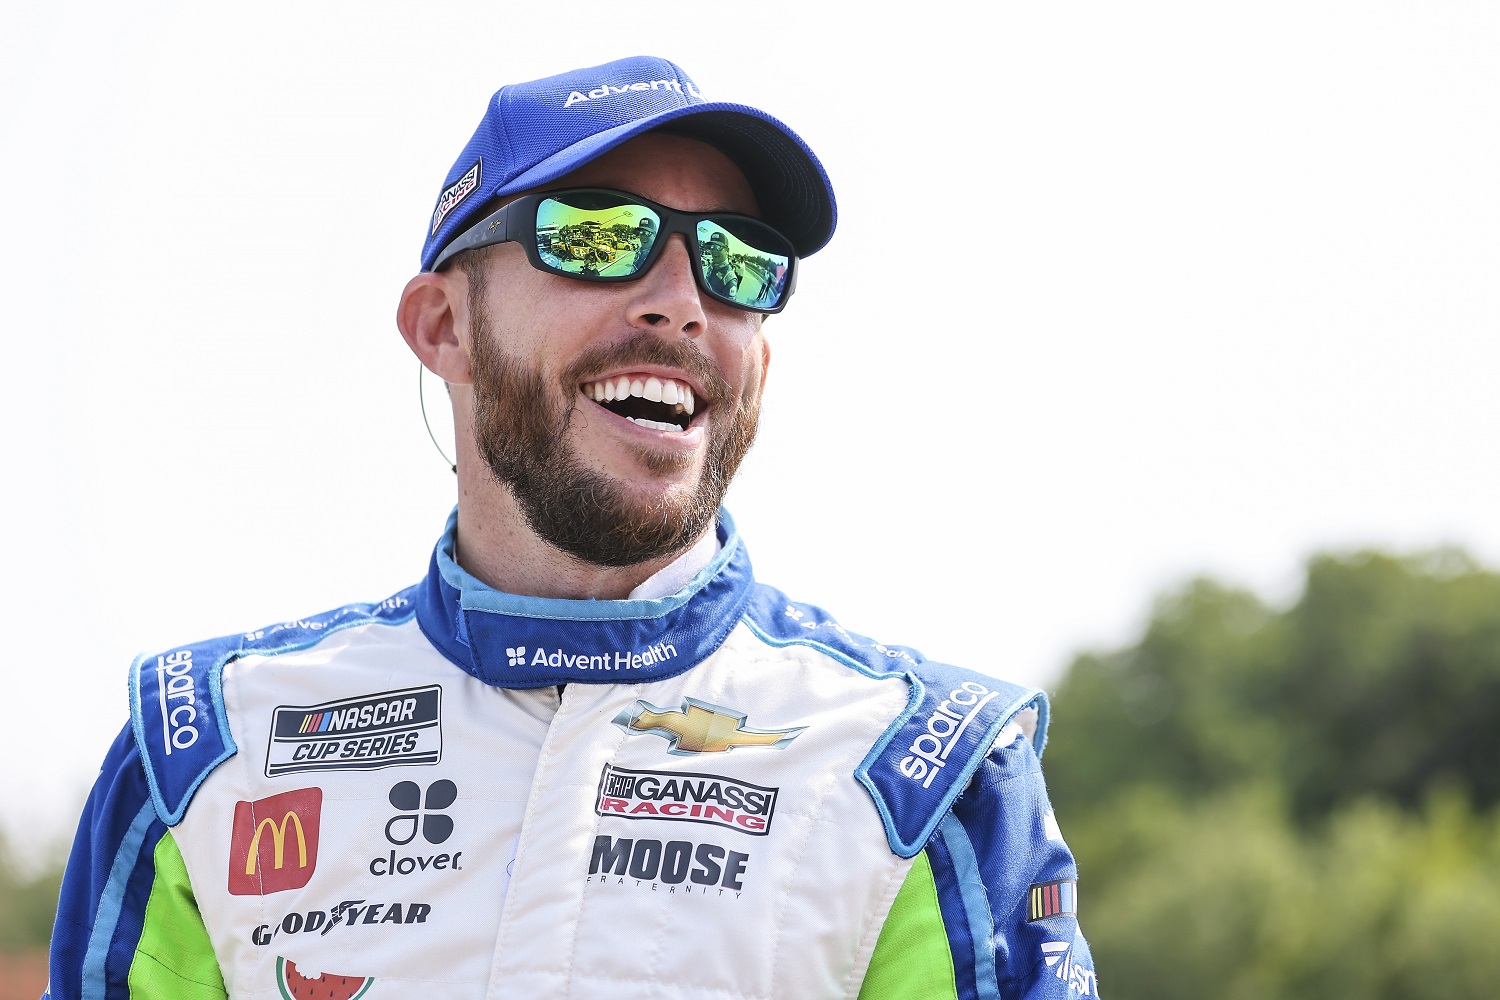 Ross Chastain laughs on the grid during qualifying for the NASCAR Cup Series race at Road America on July 4, 2021.